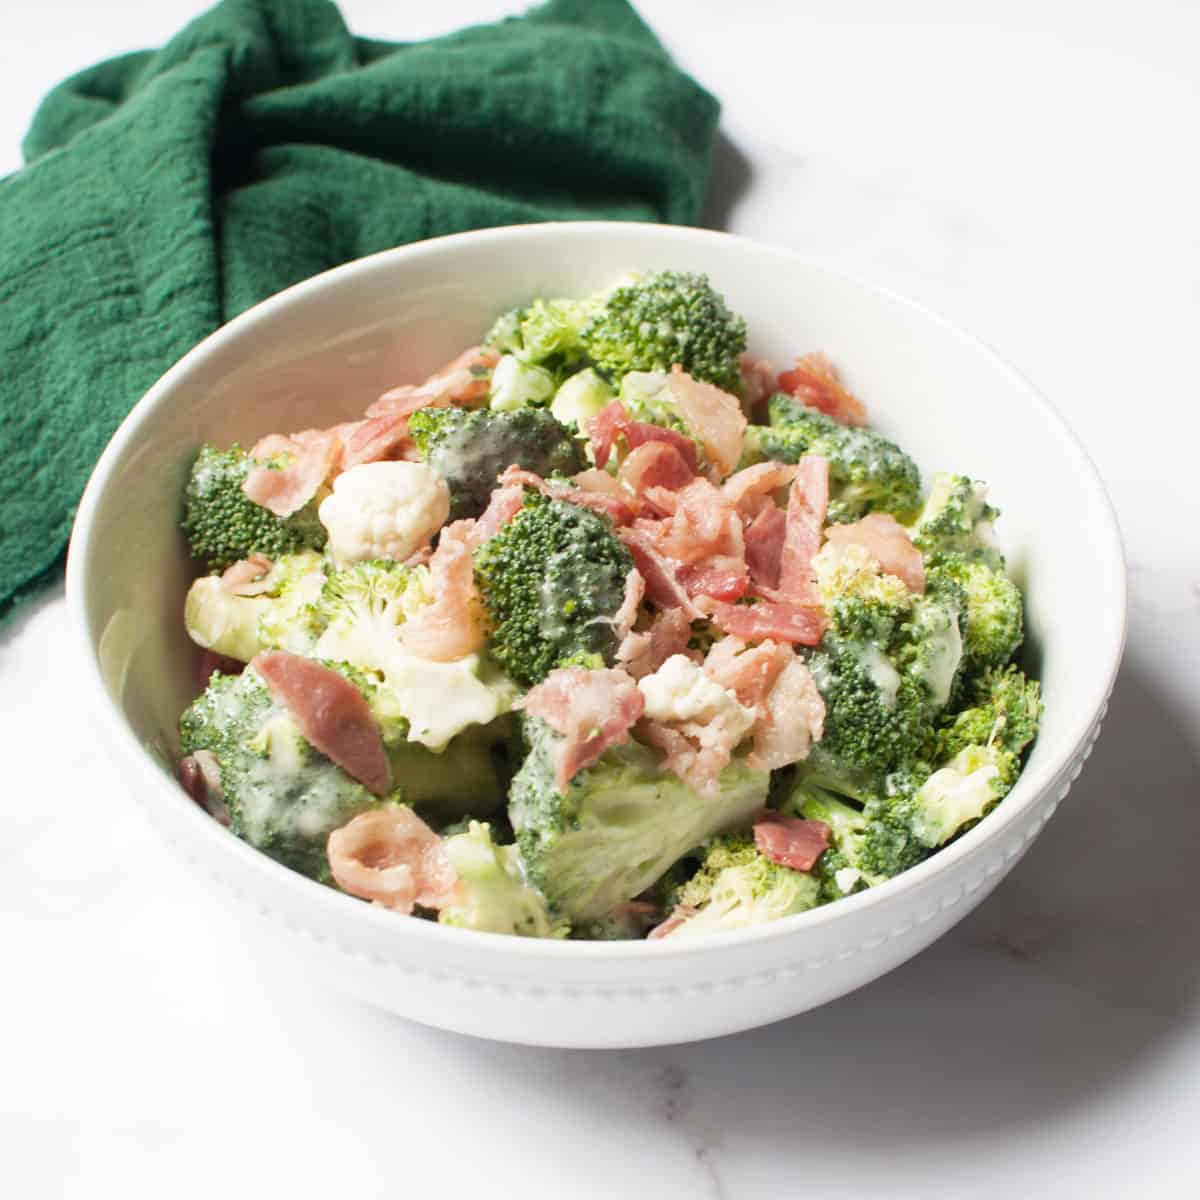 Amish Broccoli and Cauliflower Salad in a white bowl with a green linen.